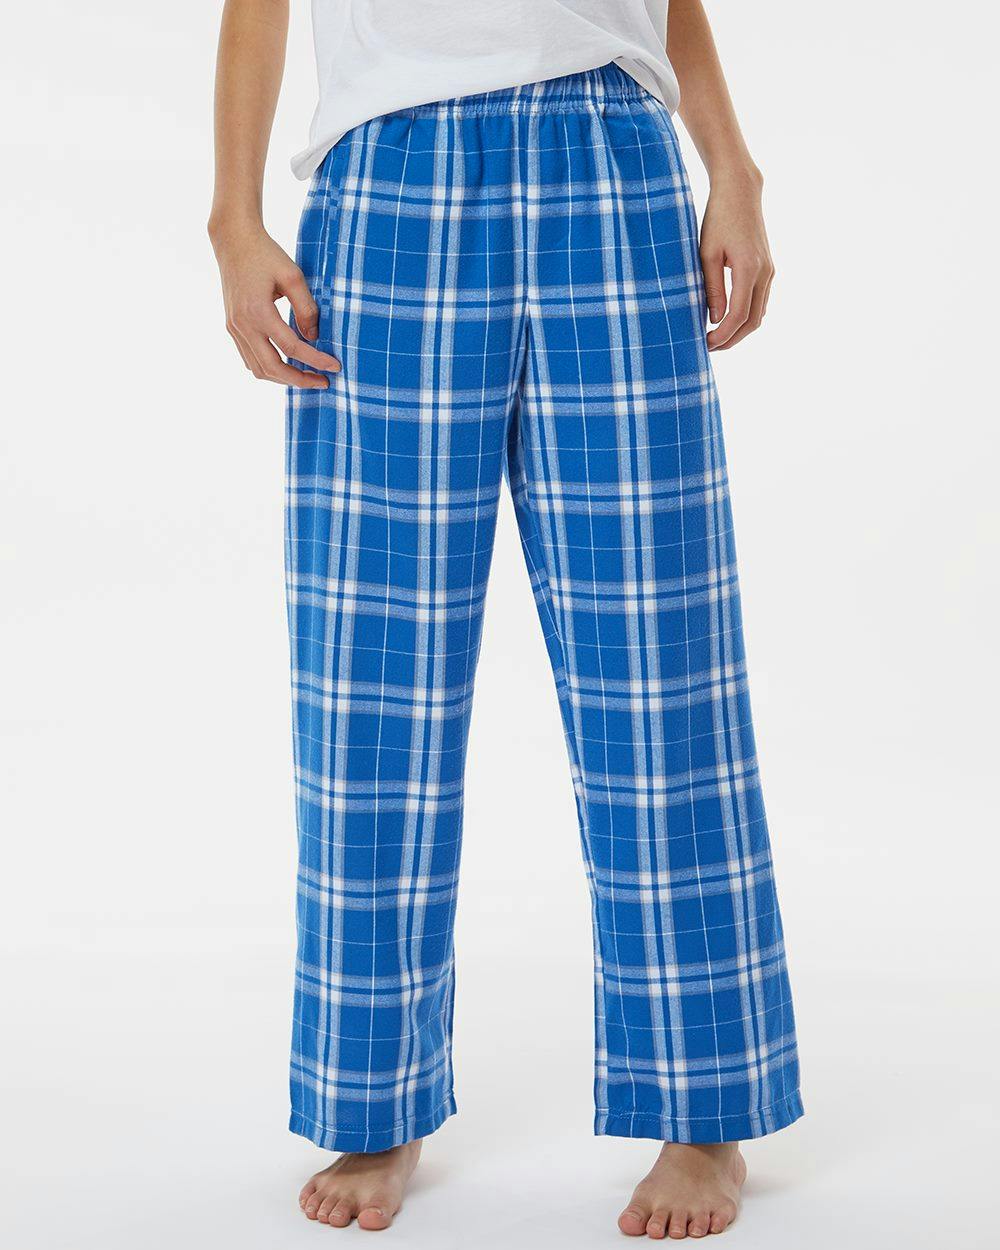 Image for Youth Flannel Pants - BY6624